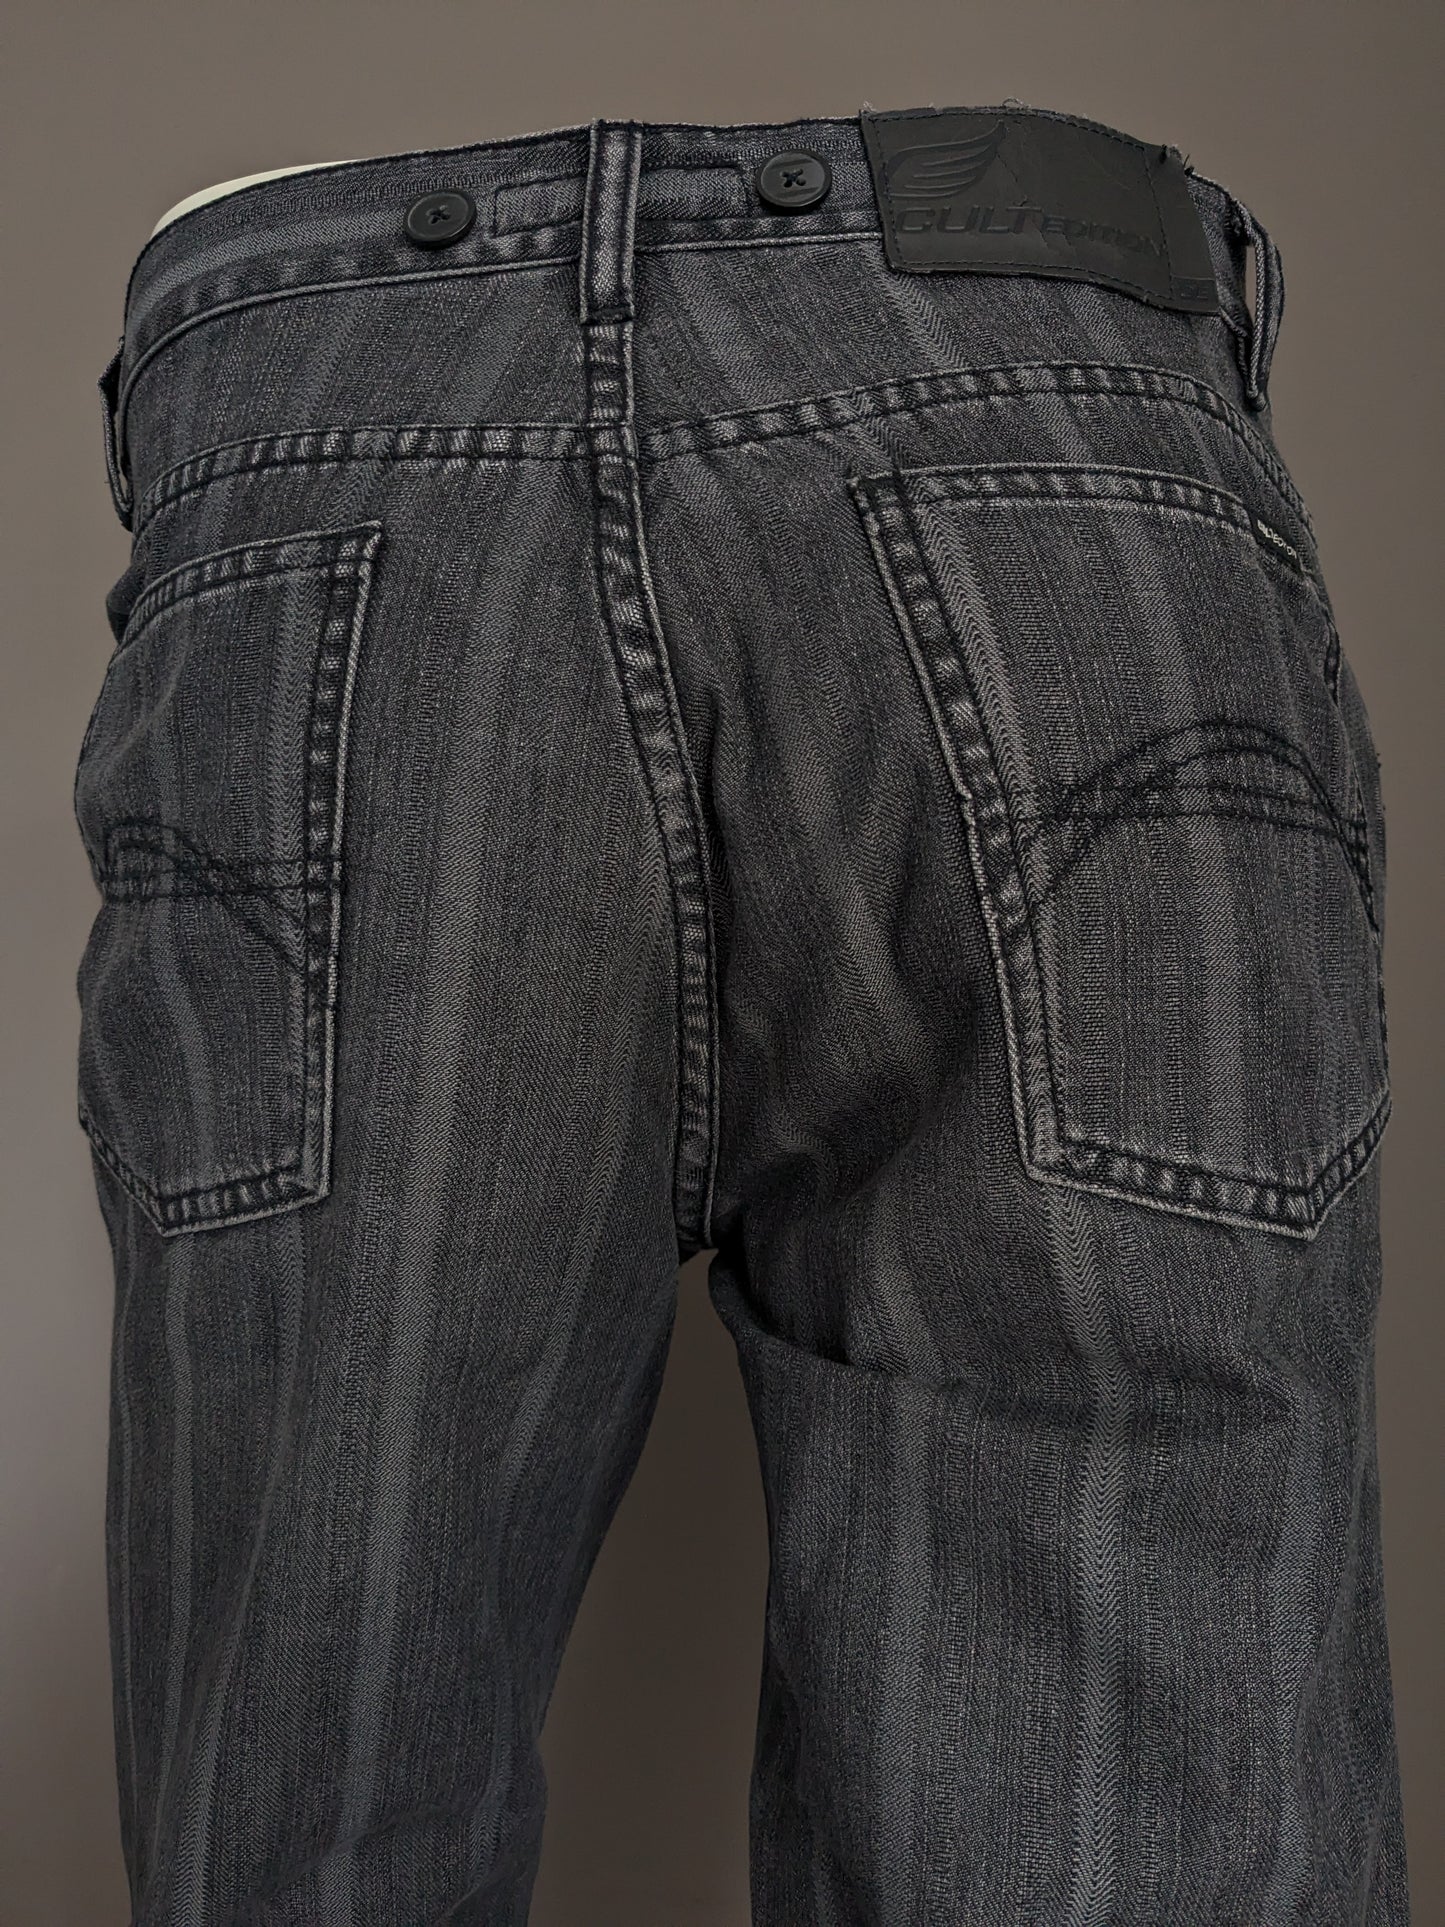 Cult Edition Jeans with suspenders applications. Gray black striped. Size W32 - L28.